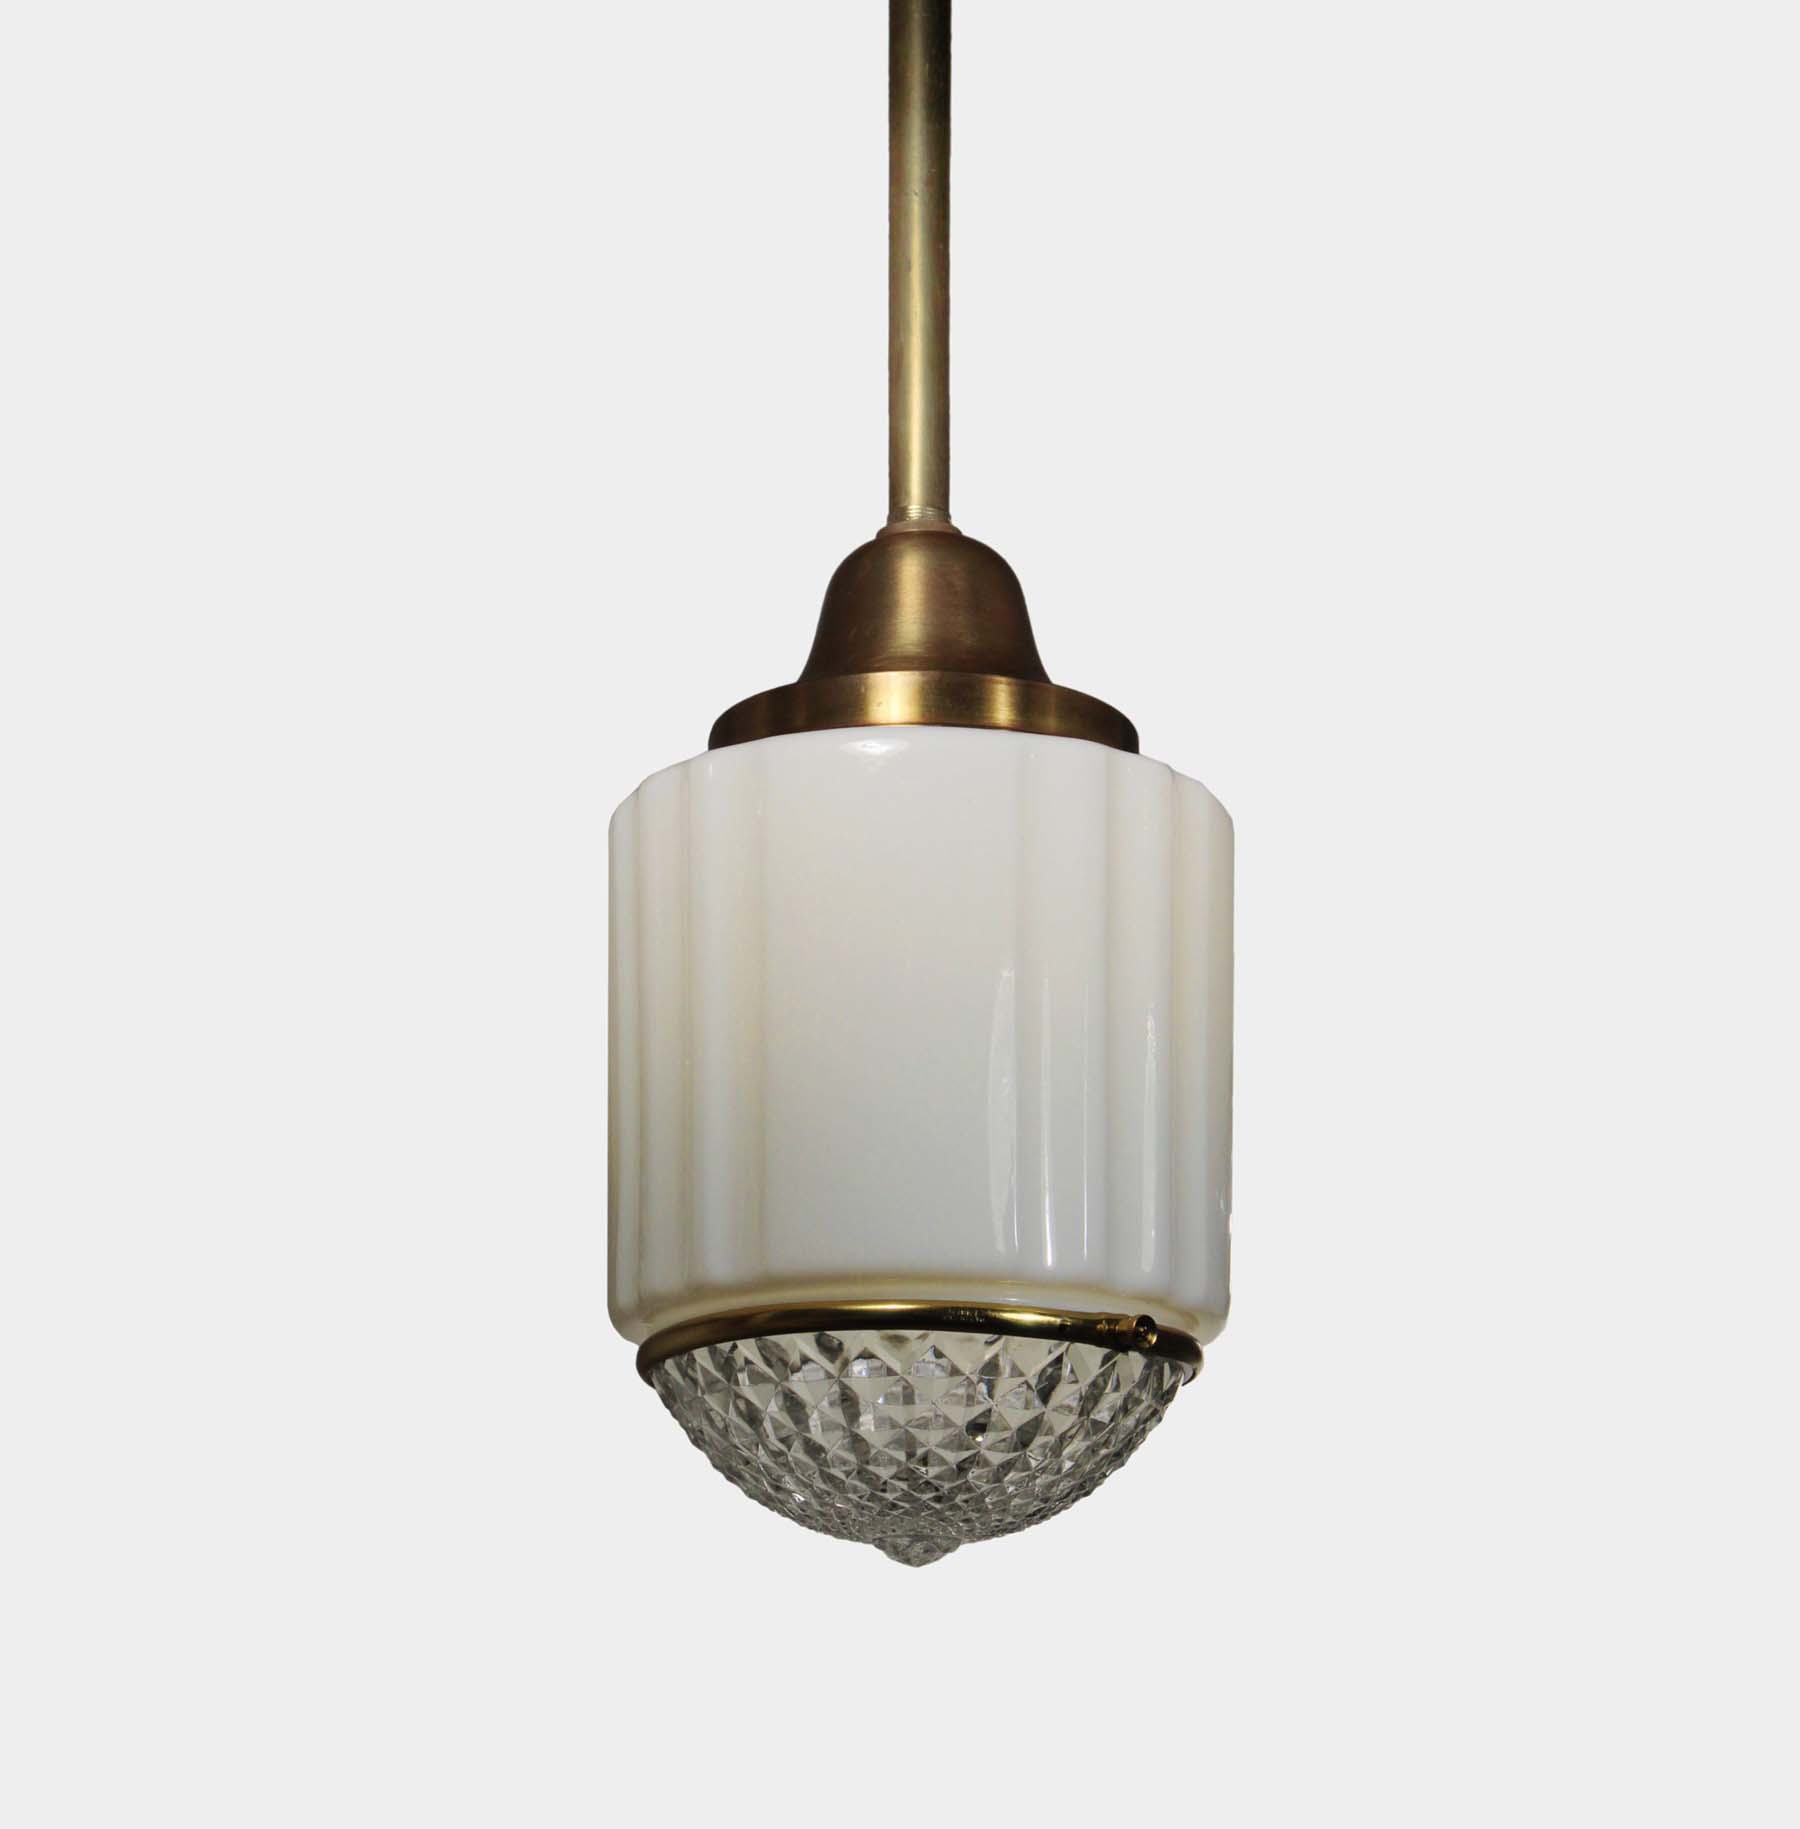 SOLD Antique Brass Art Deco Skyscraper Pendant Lights with Two-Part Prismatic Shade-69468